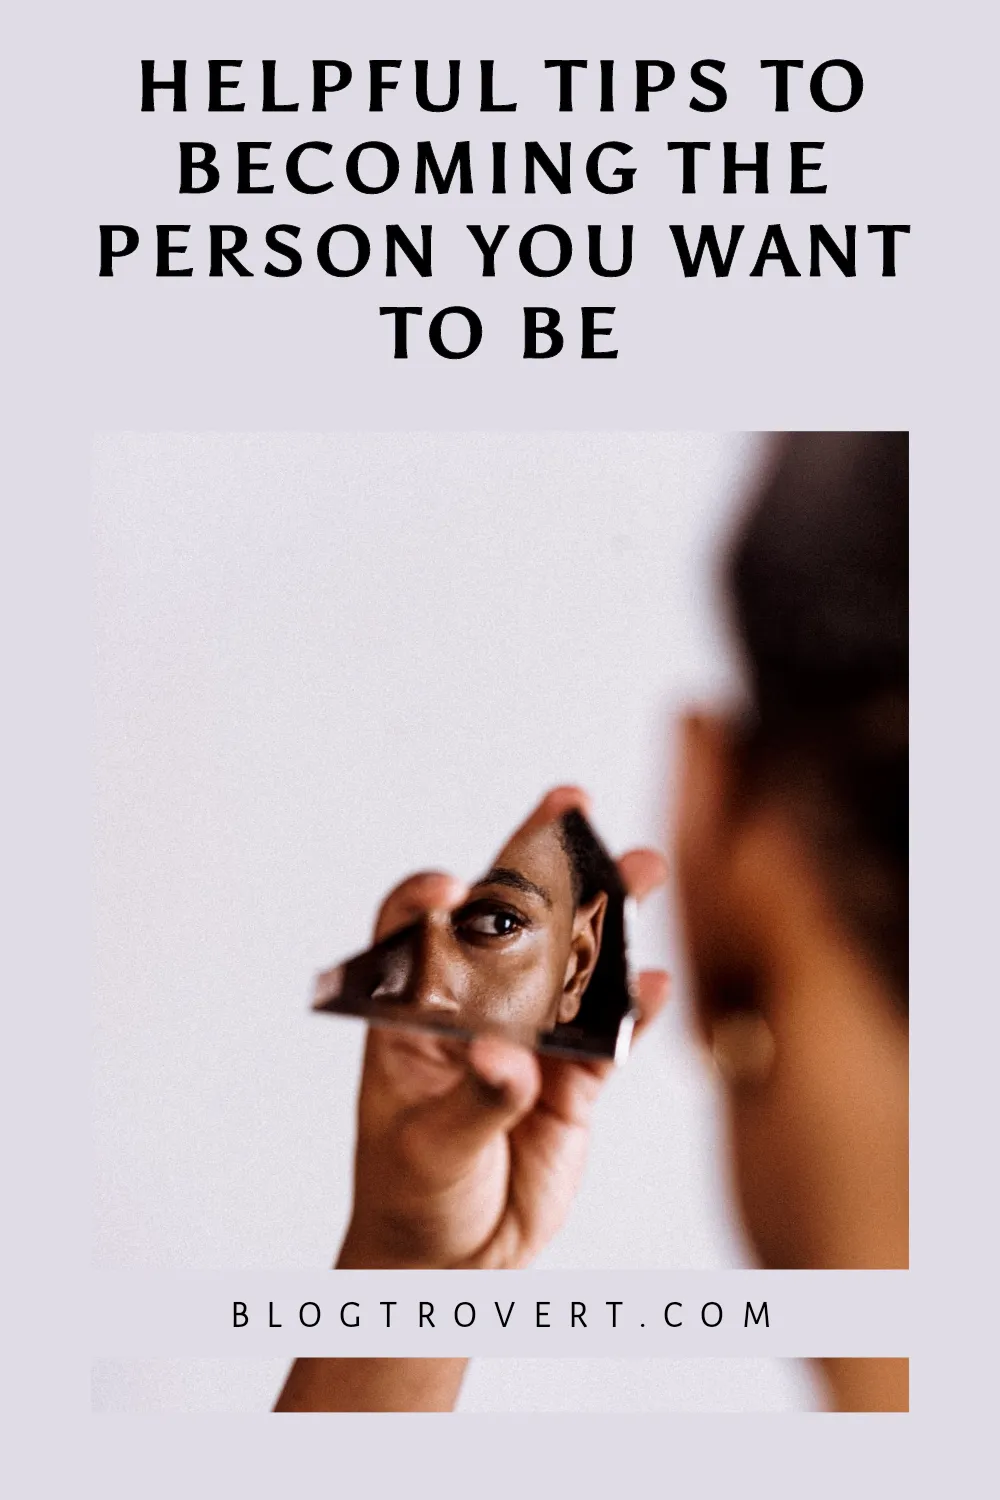 How to become the person you want to be - 17 helpful tips 6